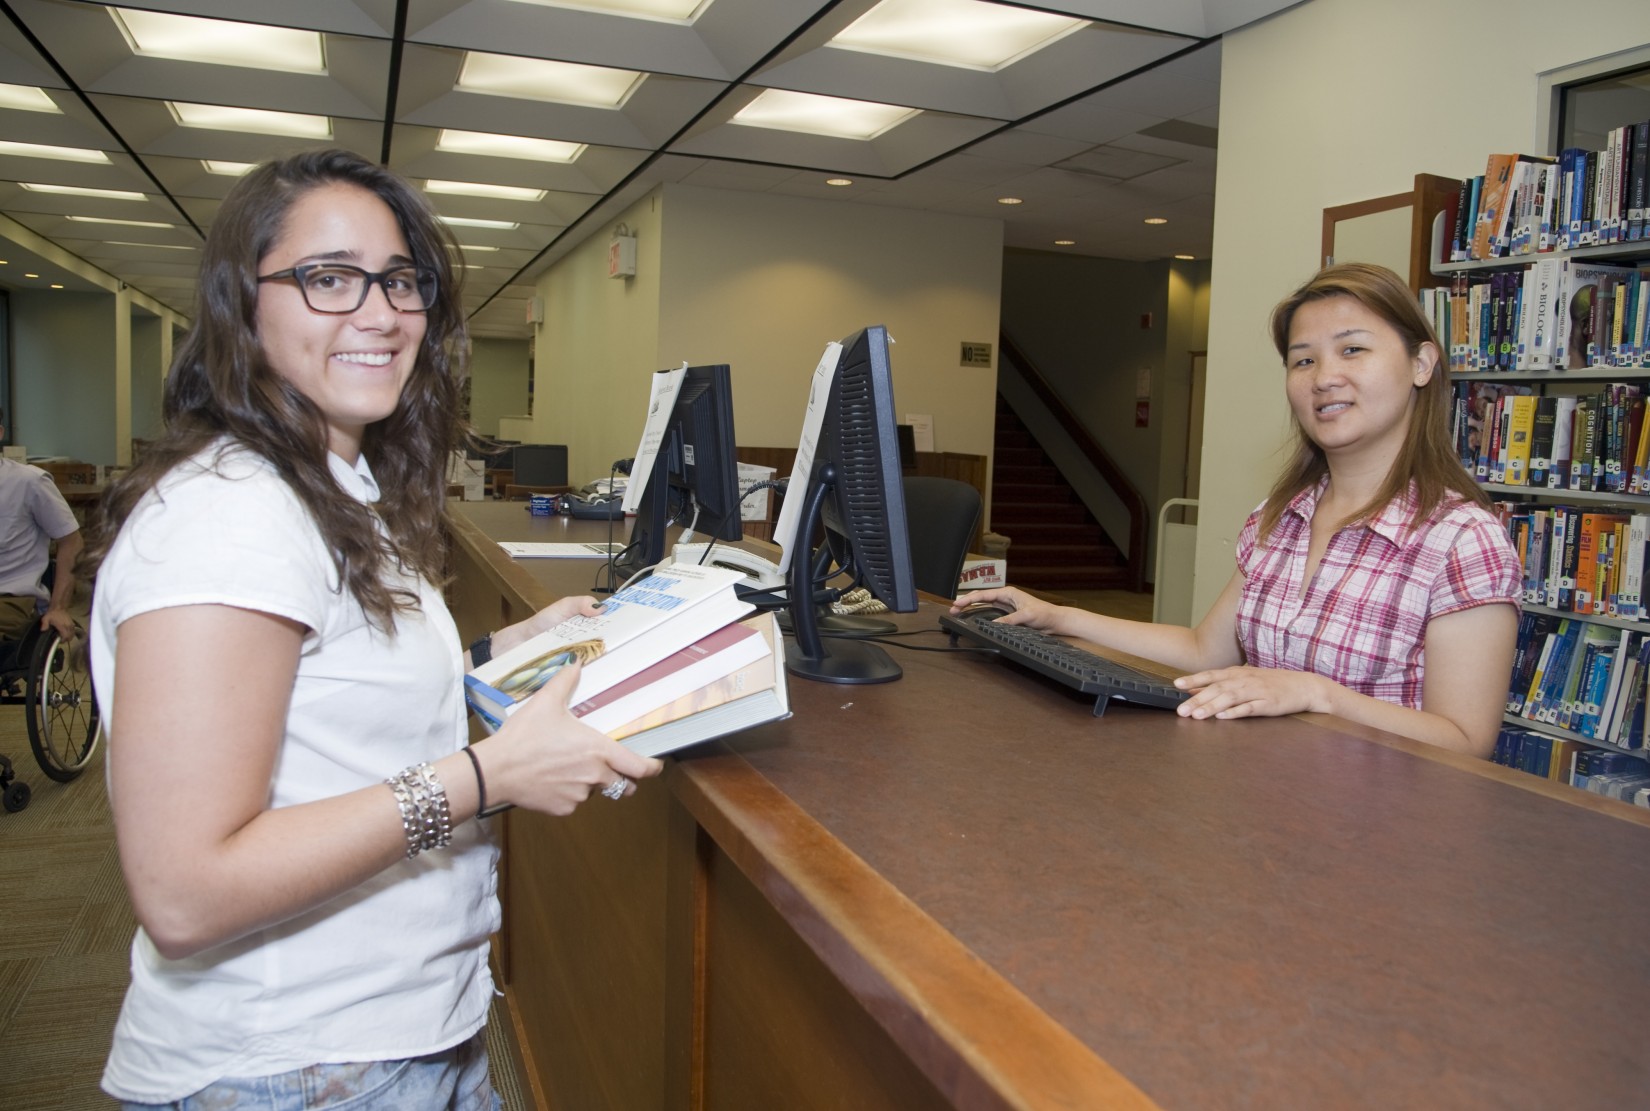 Checking out at the circulation desk in the Shanahan Library